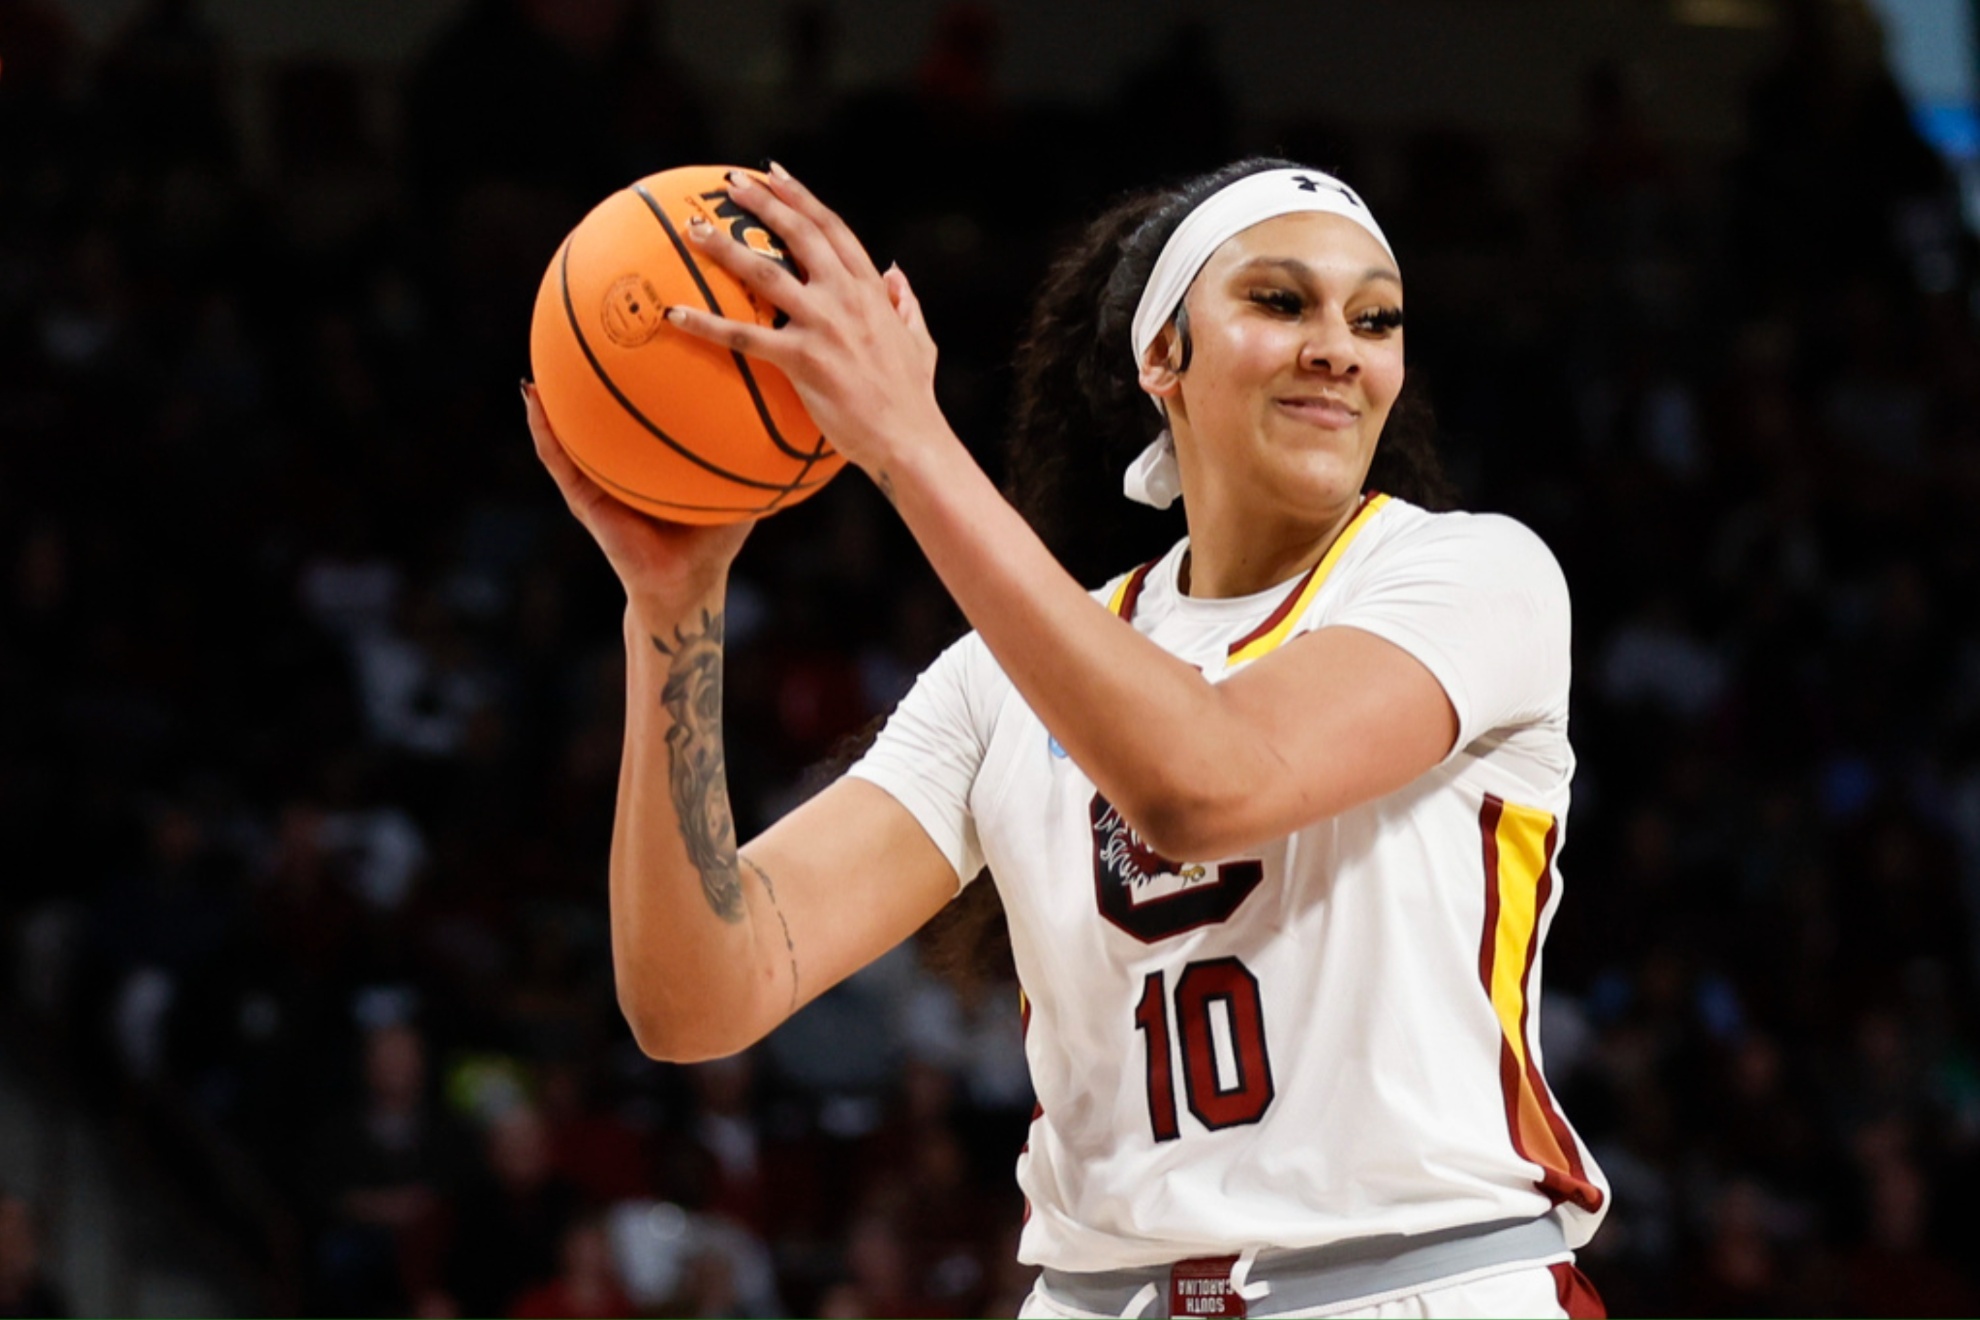 kamilla cardoso net worth: how much the south carolina player gets from games and endorsements?